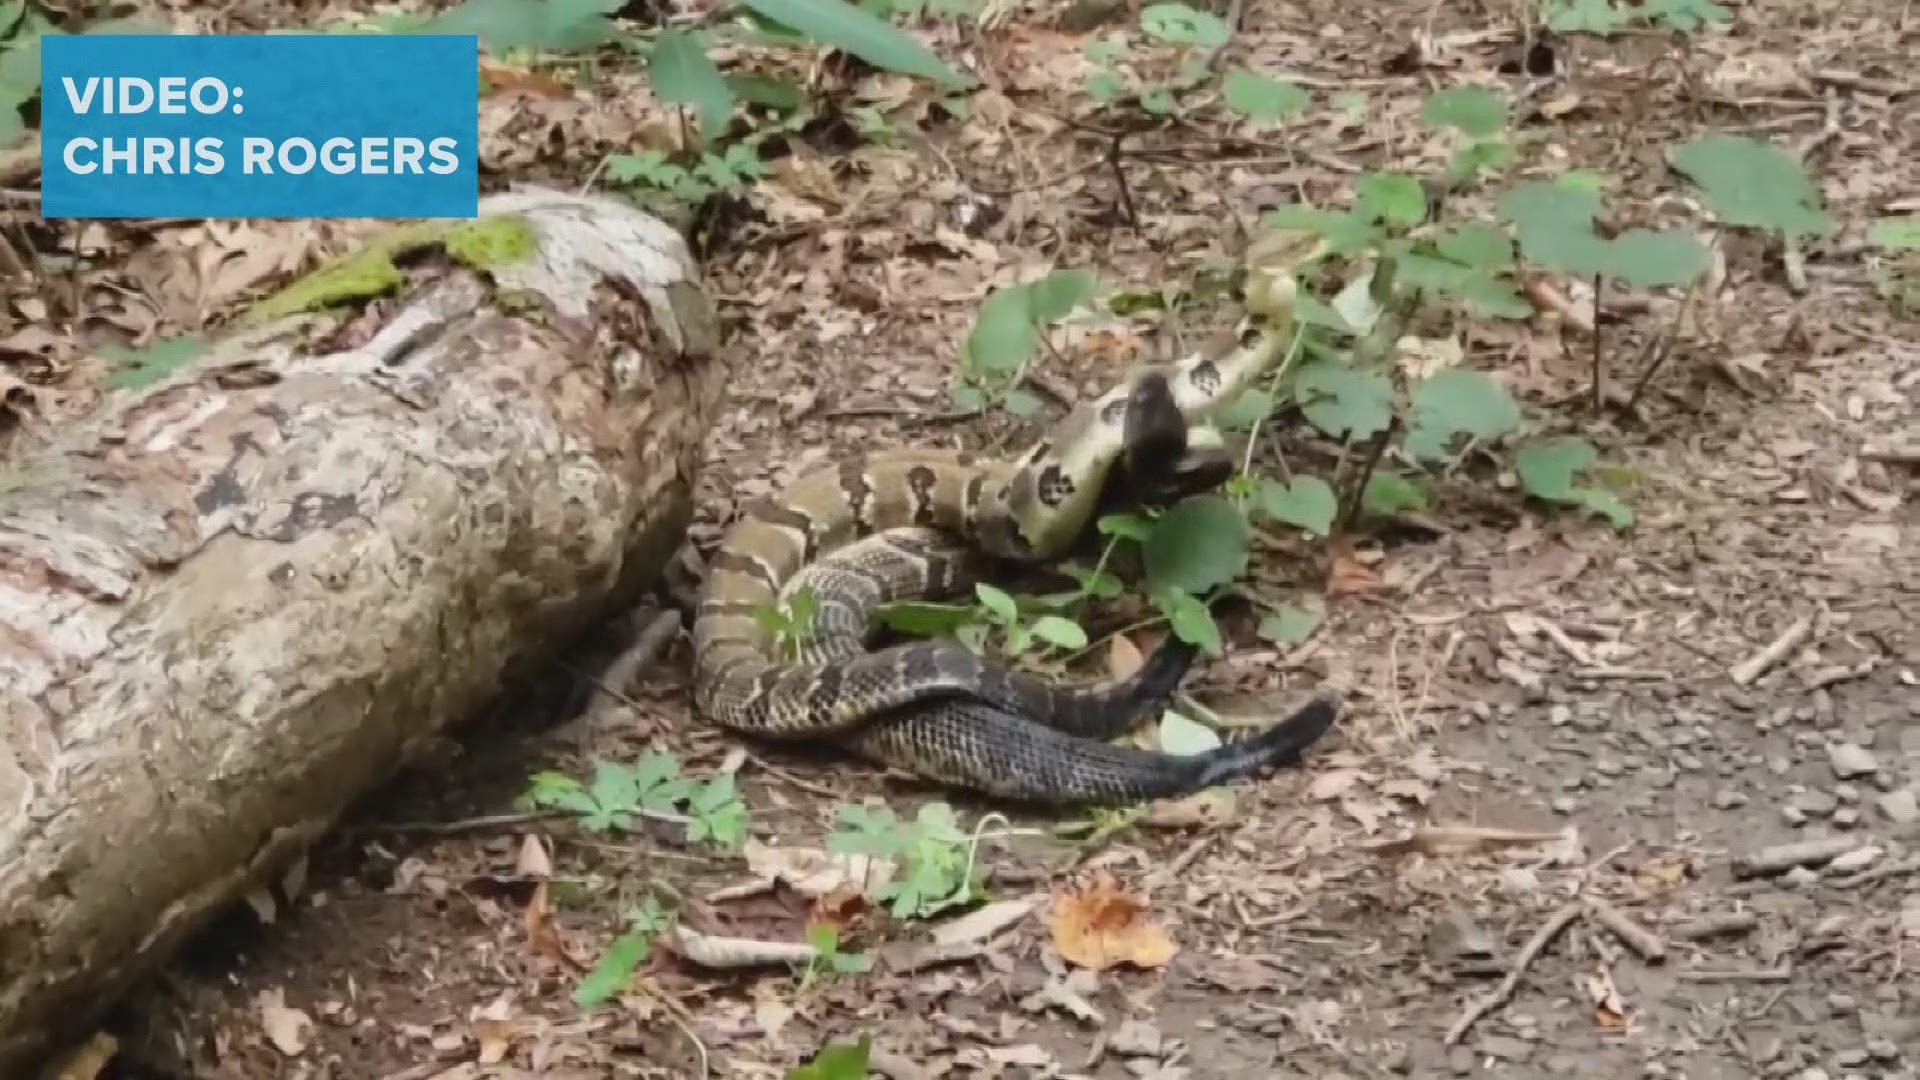 Two rattlesnakes were seen at Frozen Head State Park along Judge Branch Trail recently. (Video: Chris Rogers)